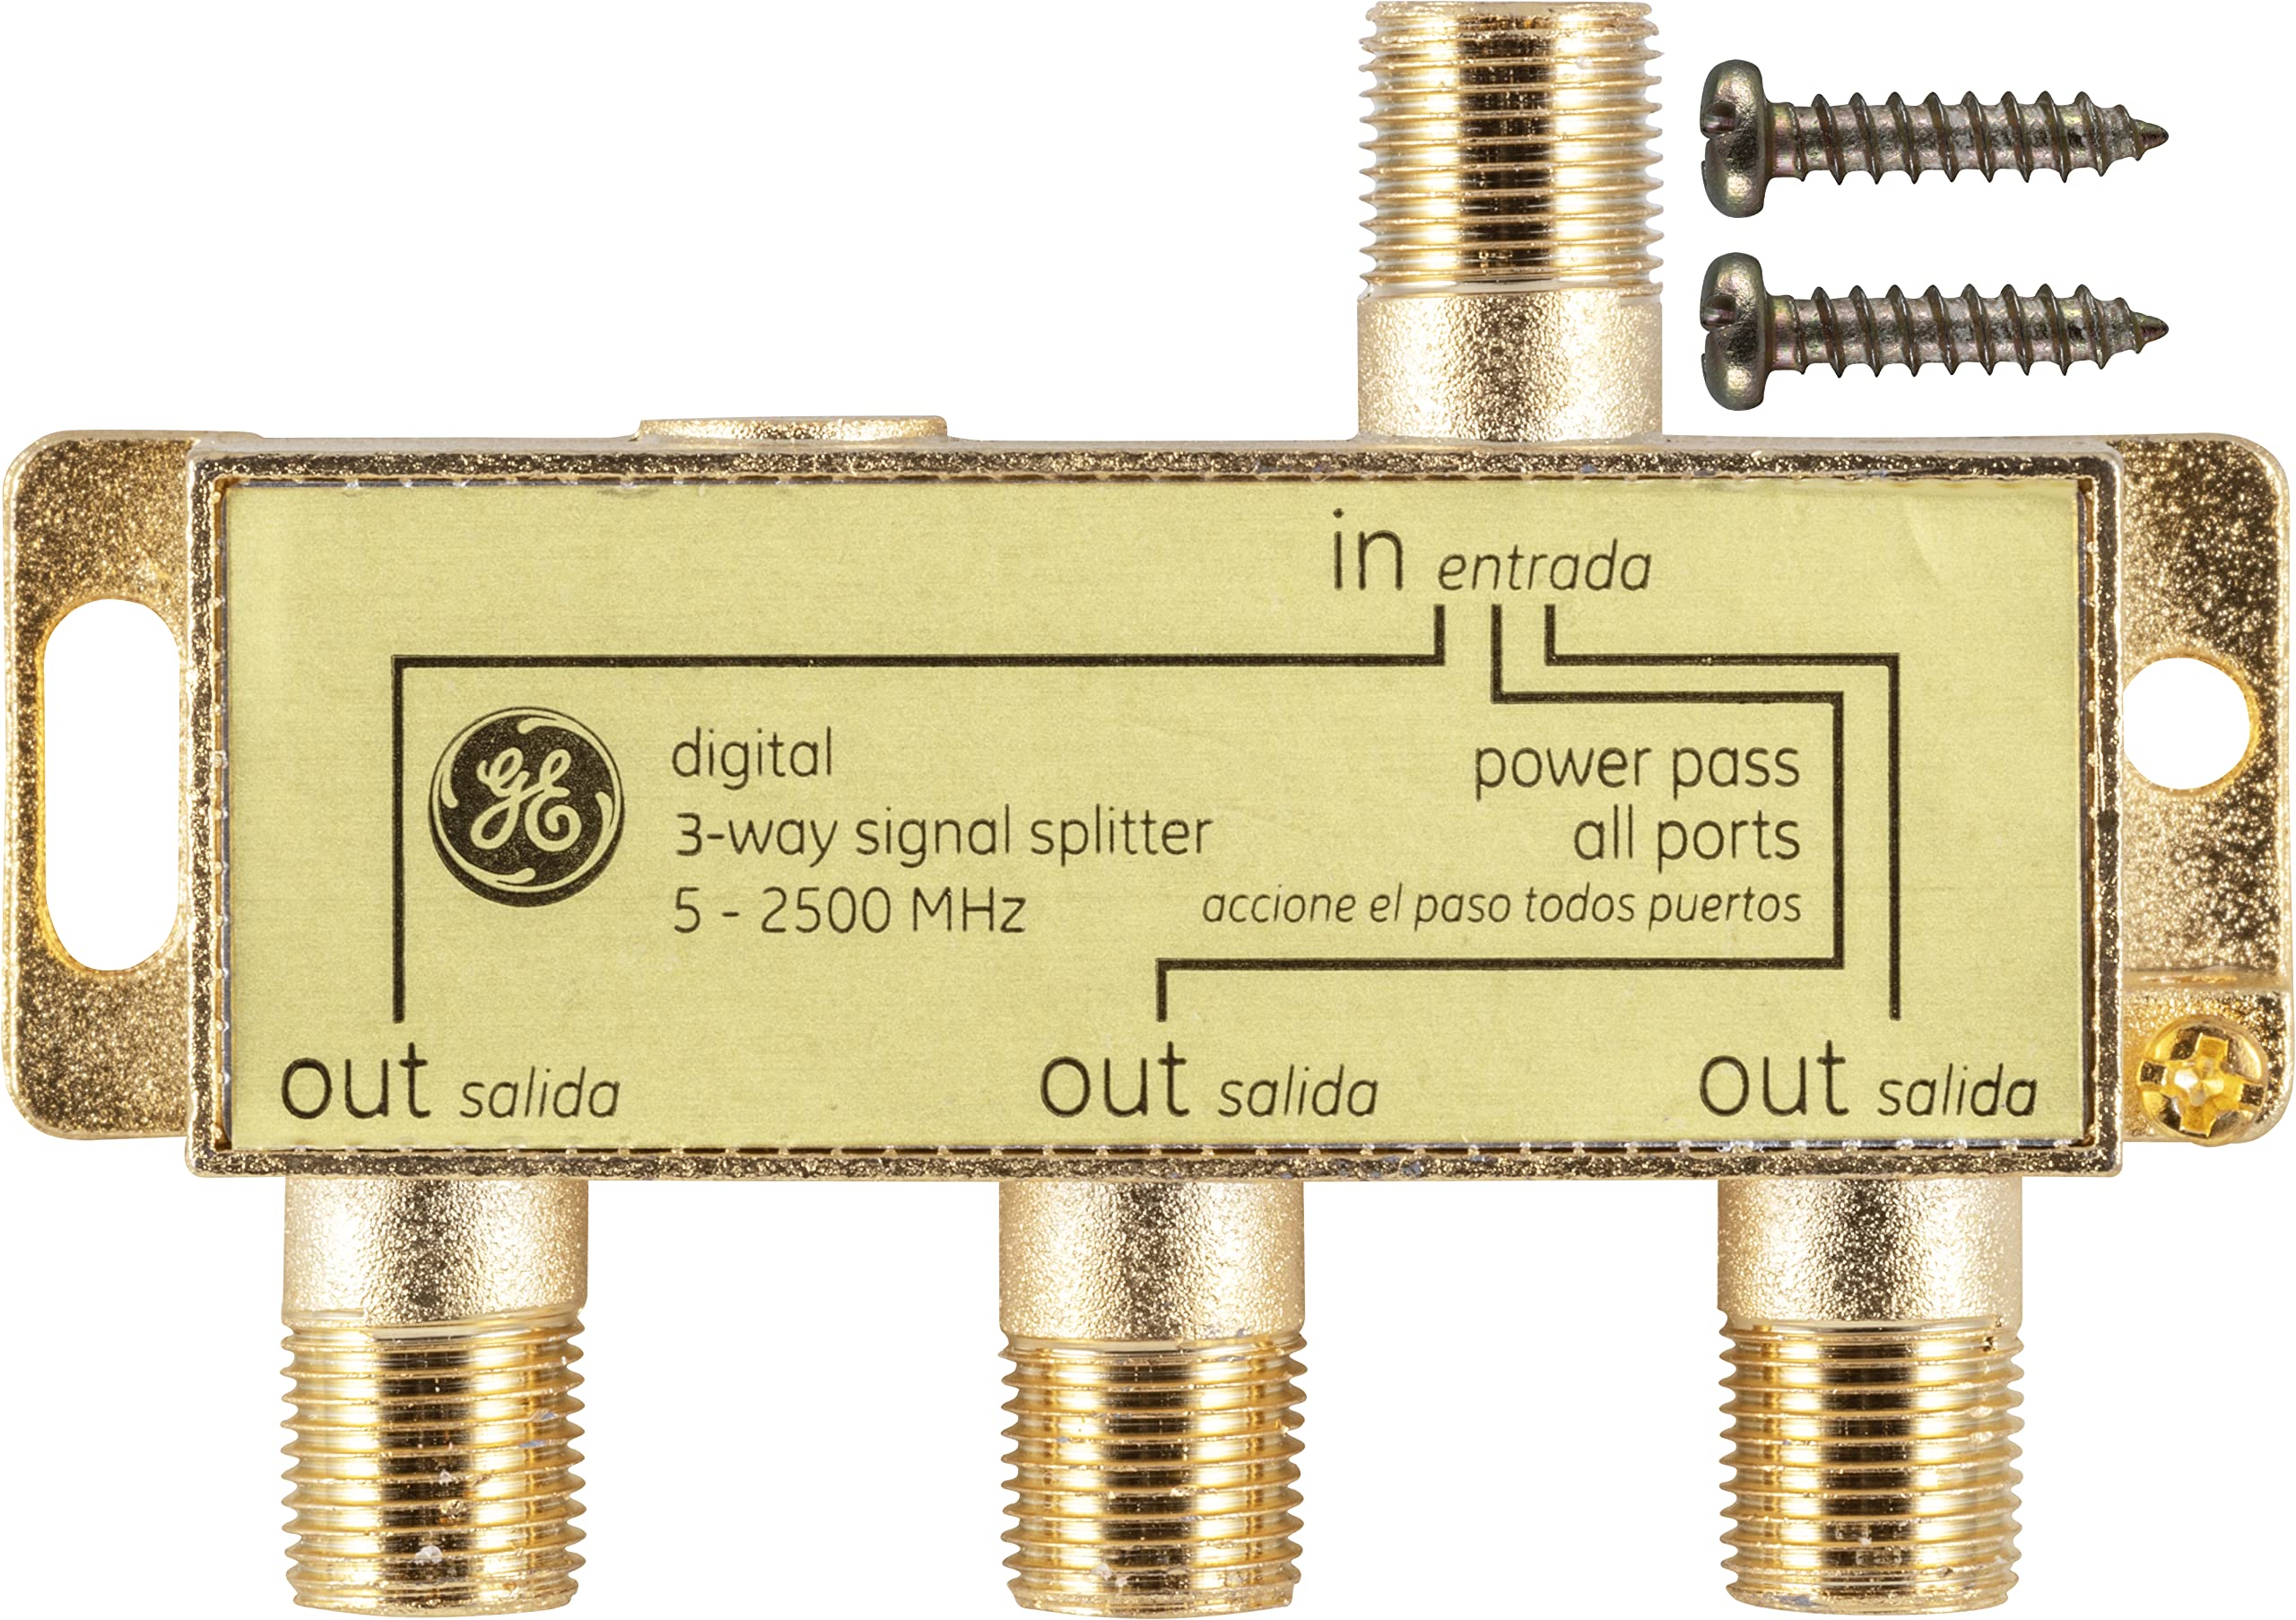 GE Digital 3-Way Coaxial Cable Splitter, 2.5 GHz 5-2500 MHz, RG6 Compatible, HD TV, Satellite, High Speed Internet, Amplifier, Antenna, Gold Plated Connectors, Corrosion Resistant, 73756